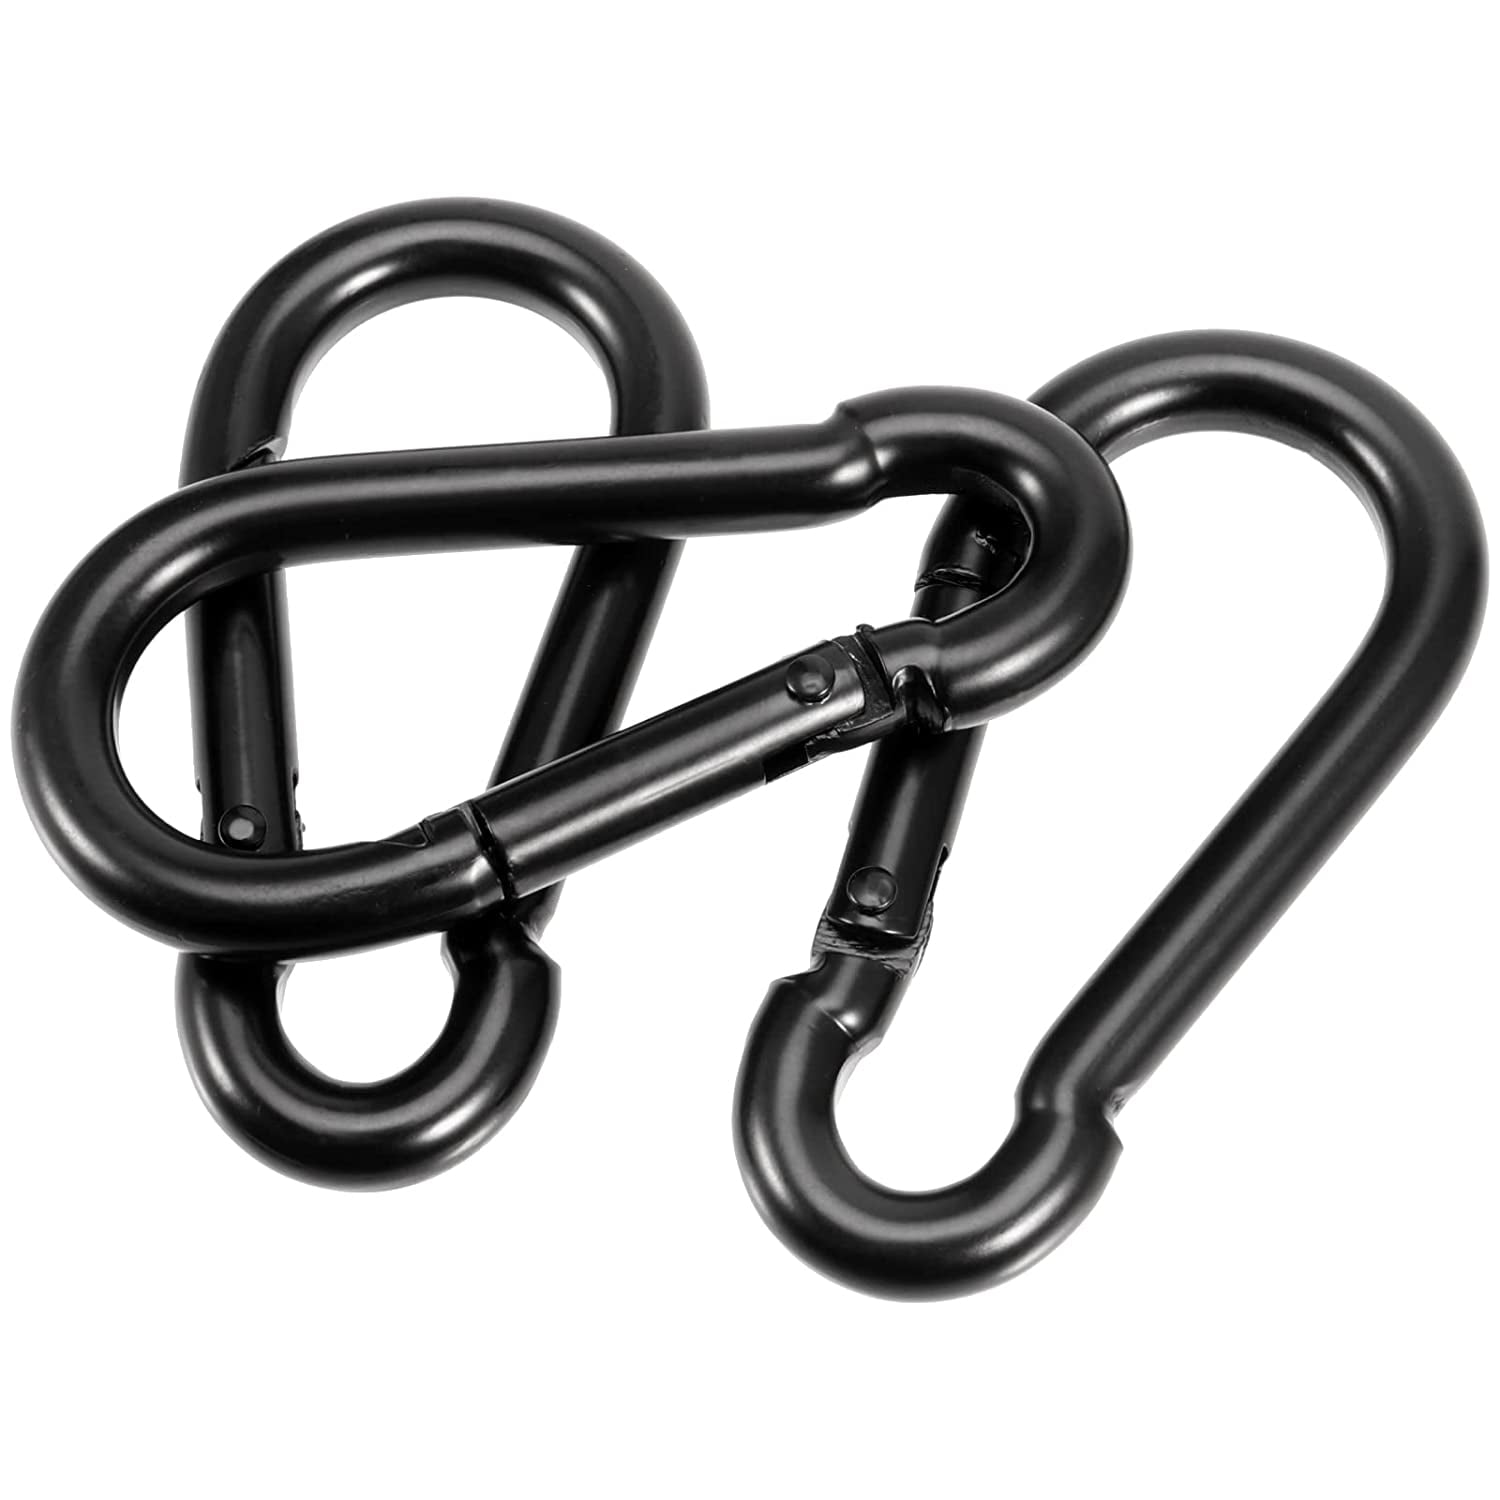 Black Spring Snap Hook, 20 Pack 5/16 x 3 Inches Heavy Duty Carbon Steel  Carabiner Clip for Camping, Fishing, Hiking, Swing and Hammock, Max Load  500 Lbs 